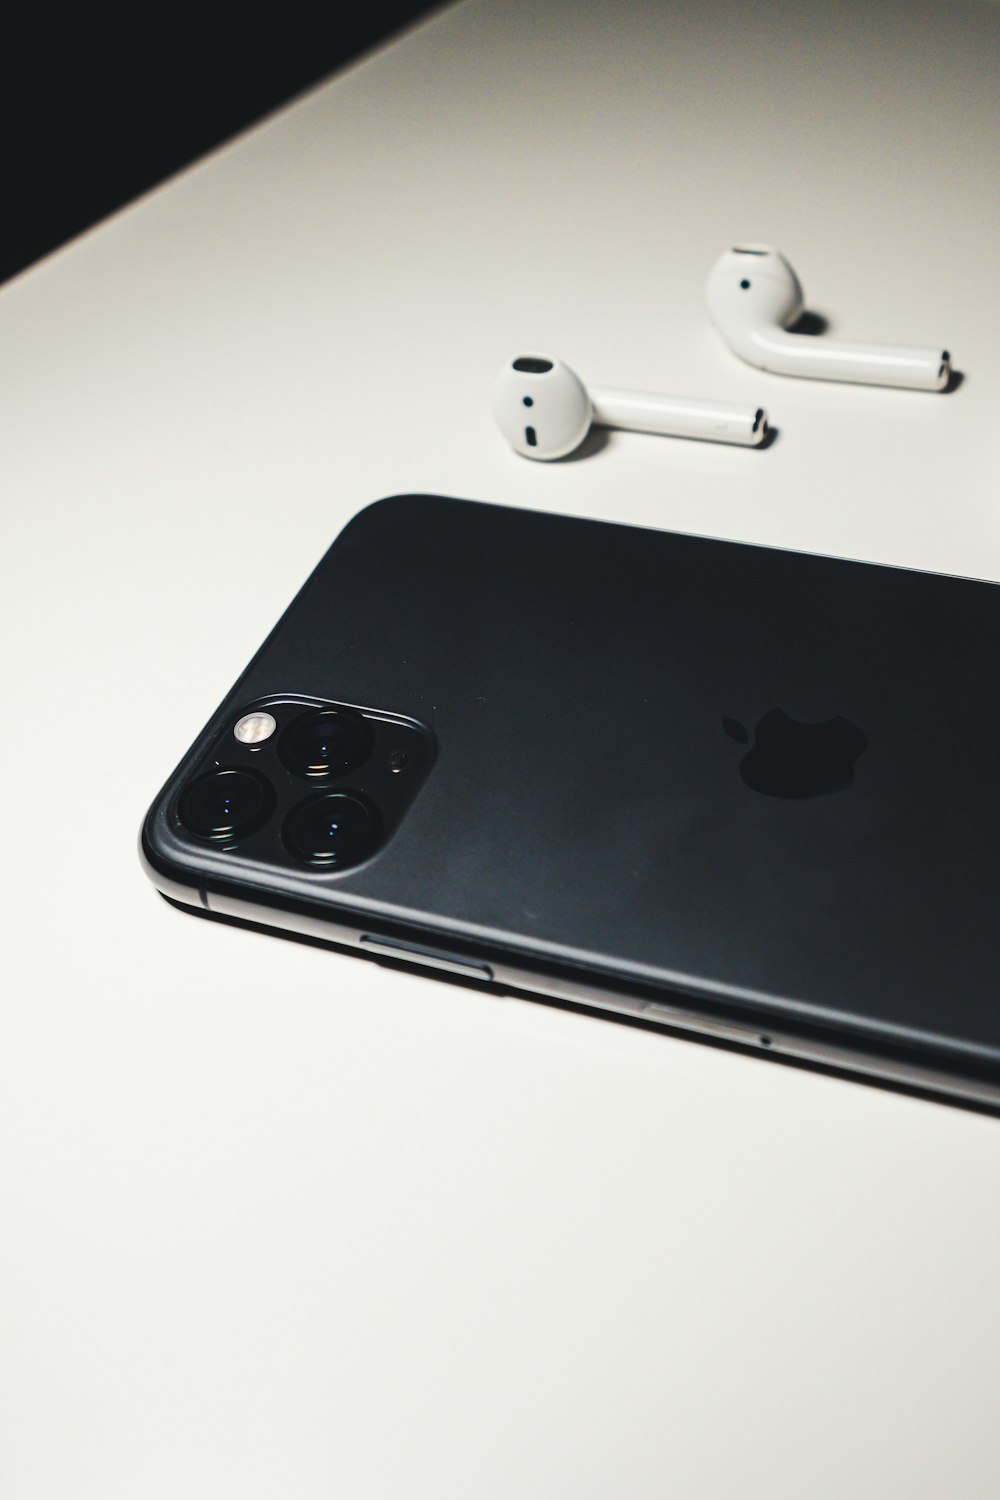 Iphone 11 Pro Max Pictures Download Free Images On Unsplash